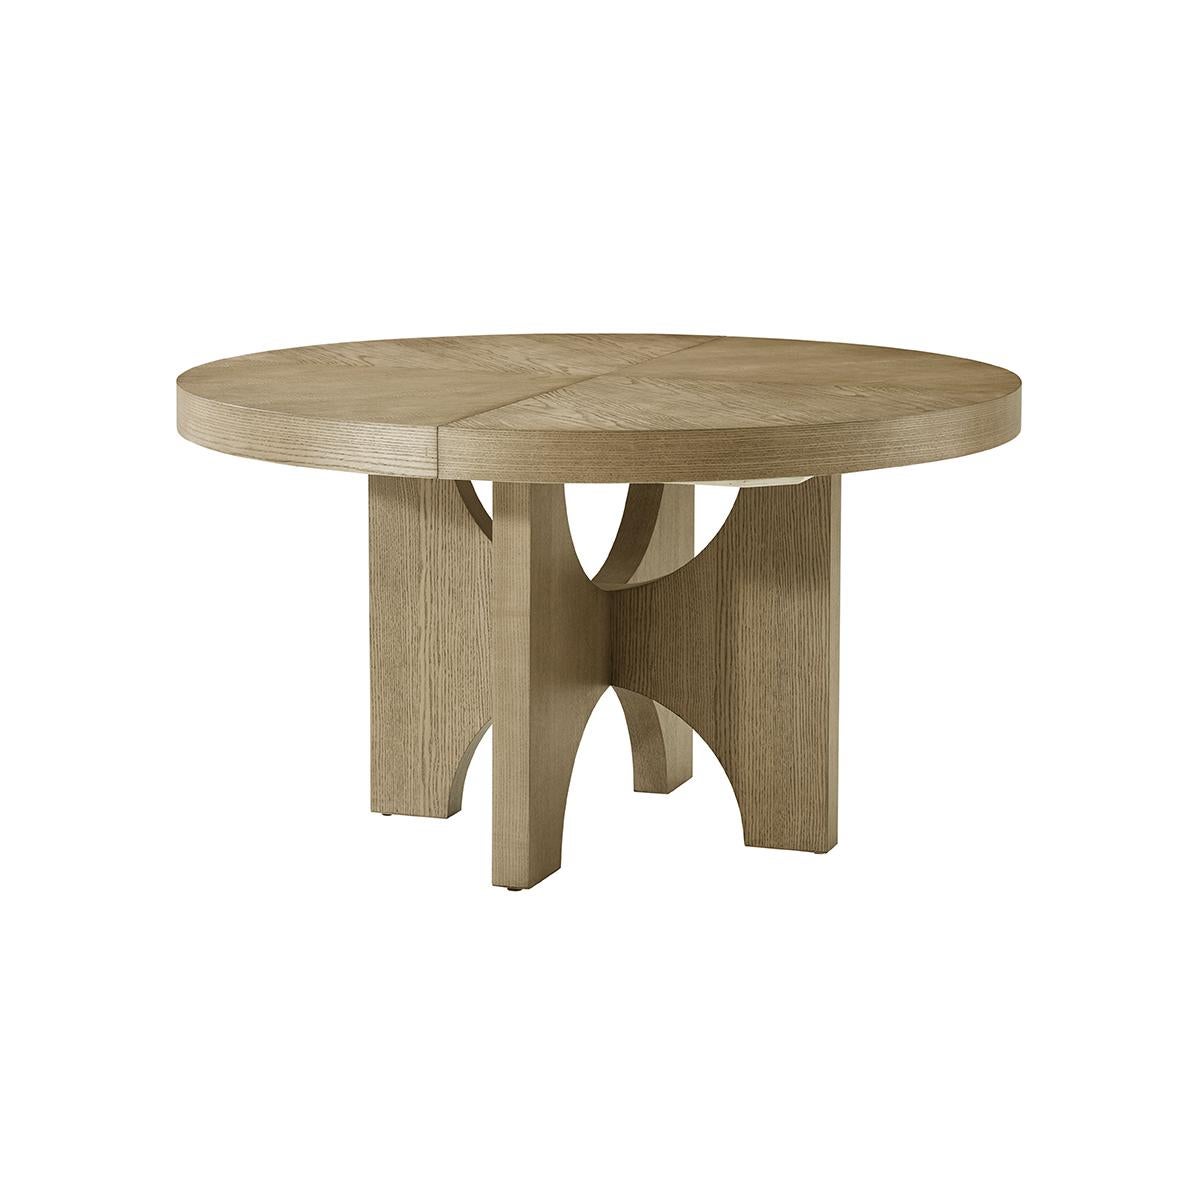 Modern Ash Dining Table, crafted from premium-figured cathedral ash in the Dune finish, this dining table boasts a rich texture and a sleek, light finish that adds a touch of elegance to any dining room. The closed round shape of the table invites